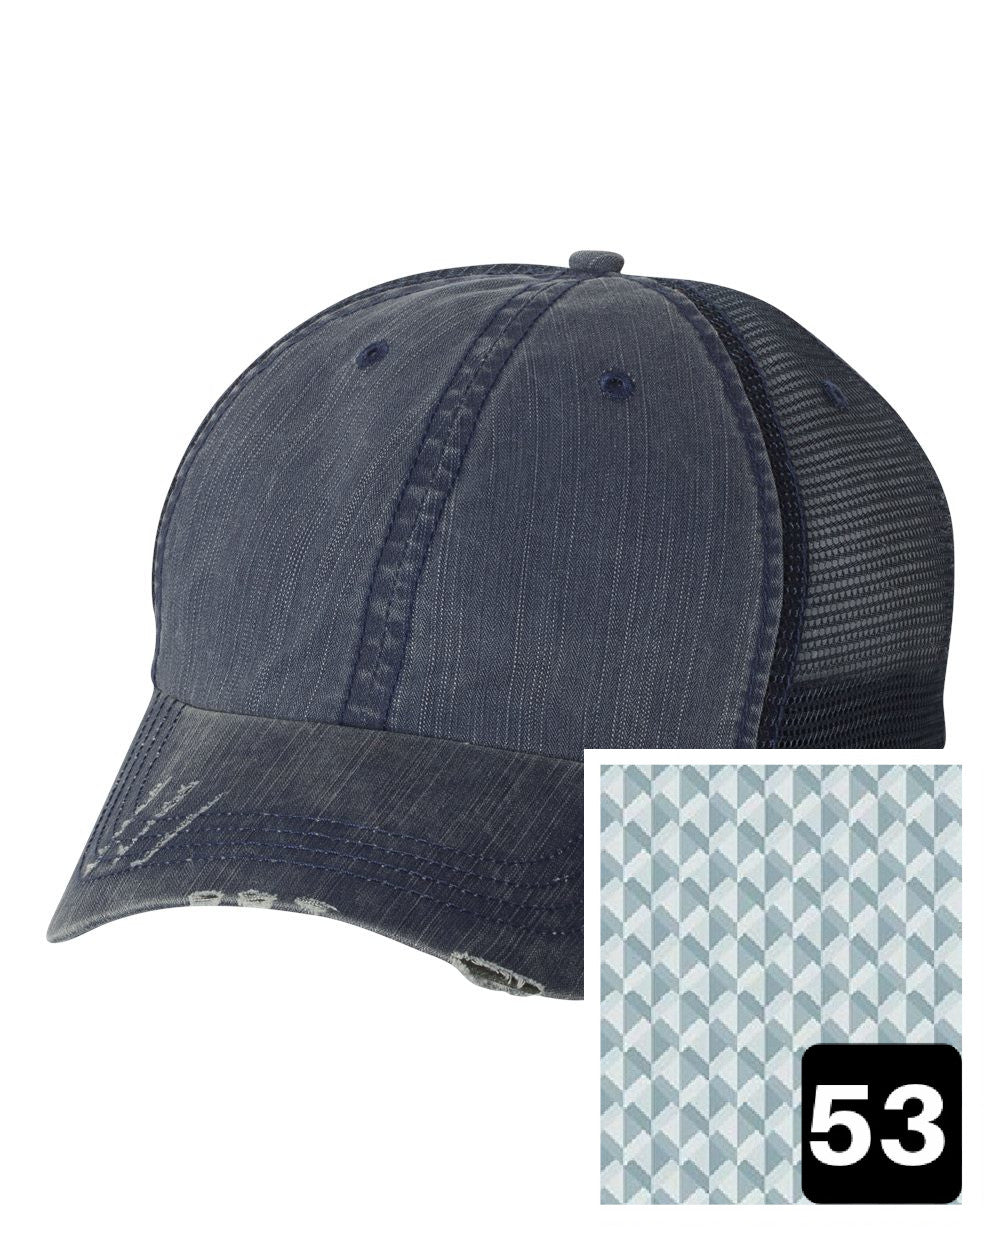 California Hat | Navy Distressed Trucker Cap | Many Fabric Choices